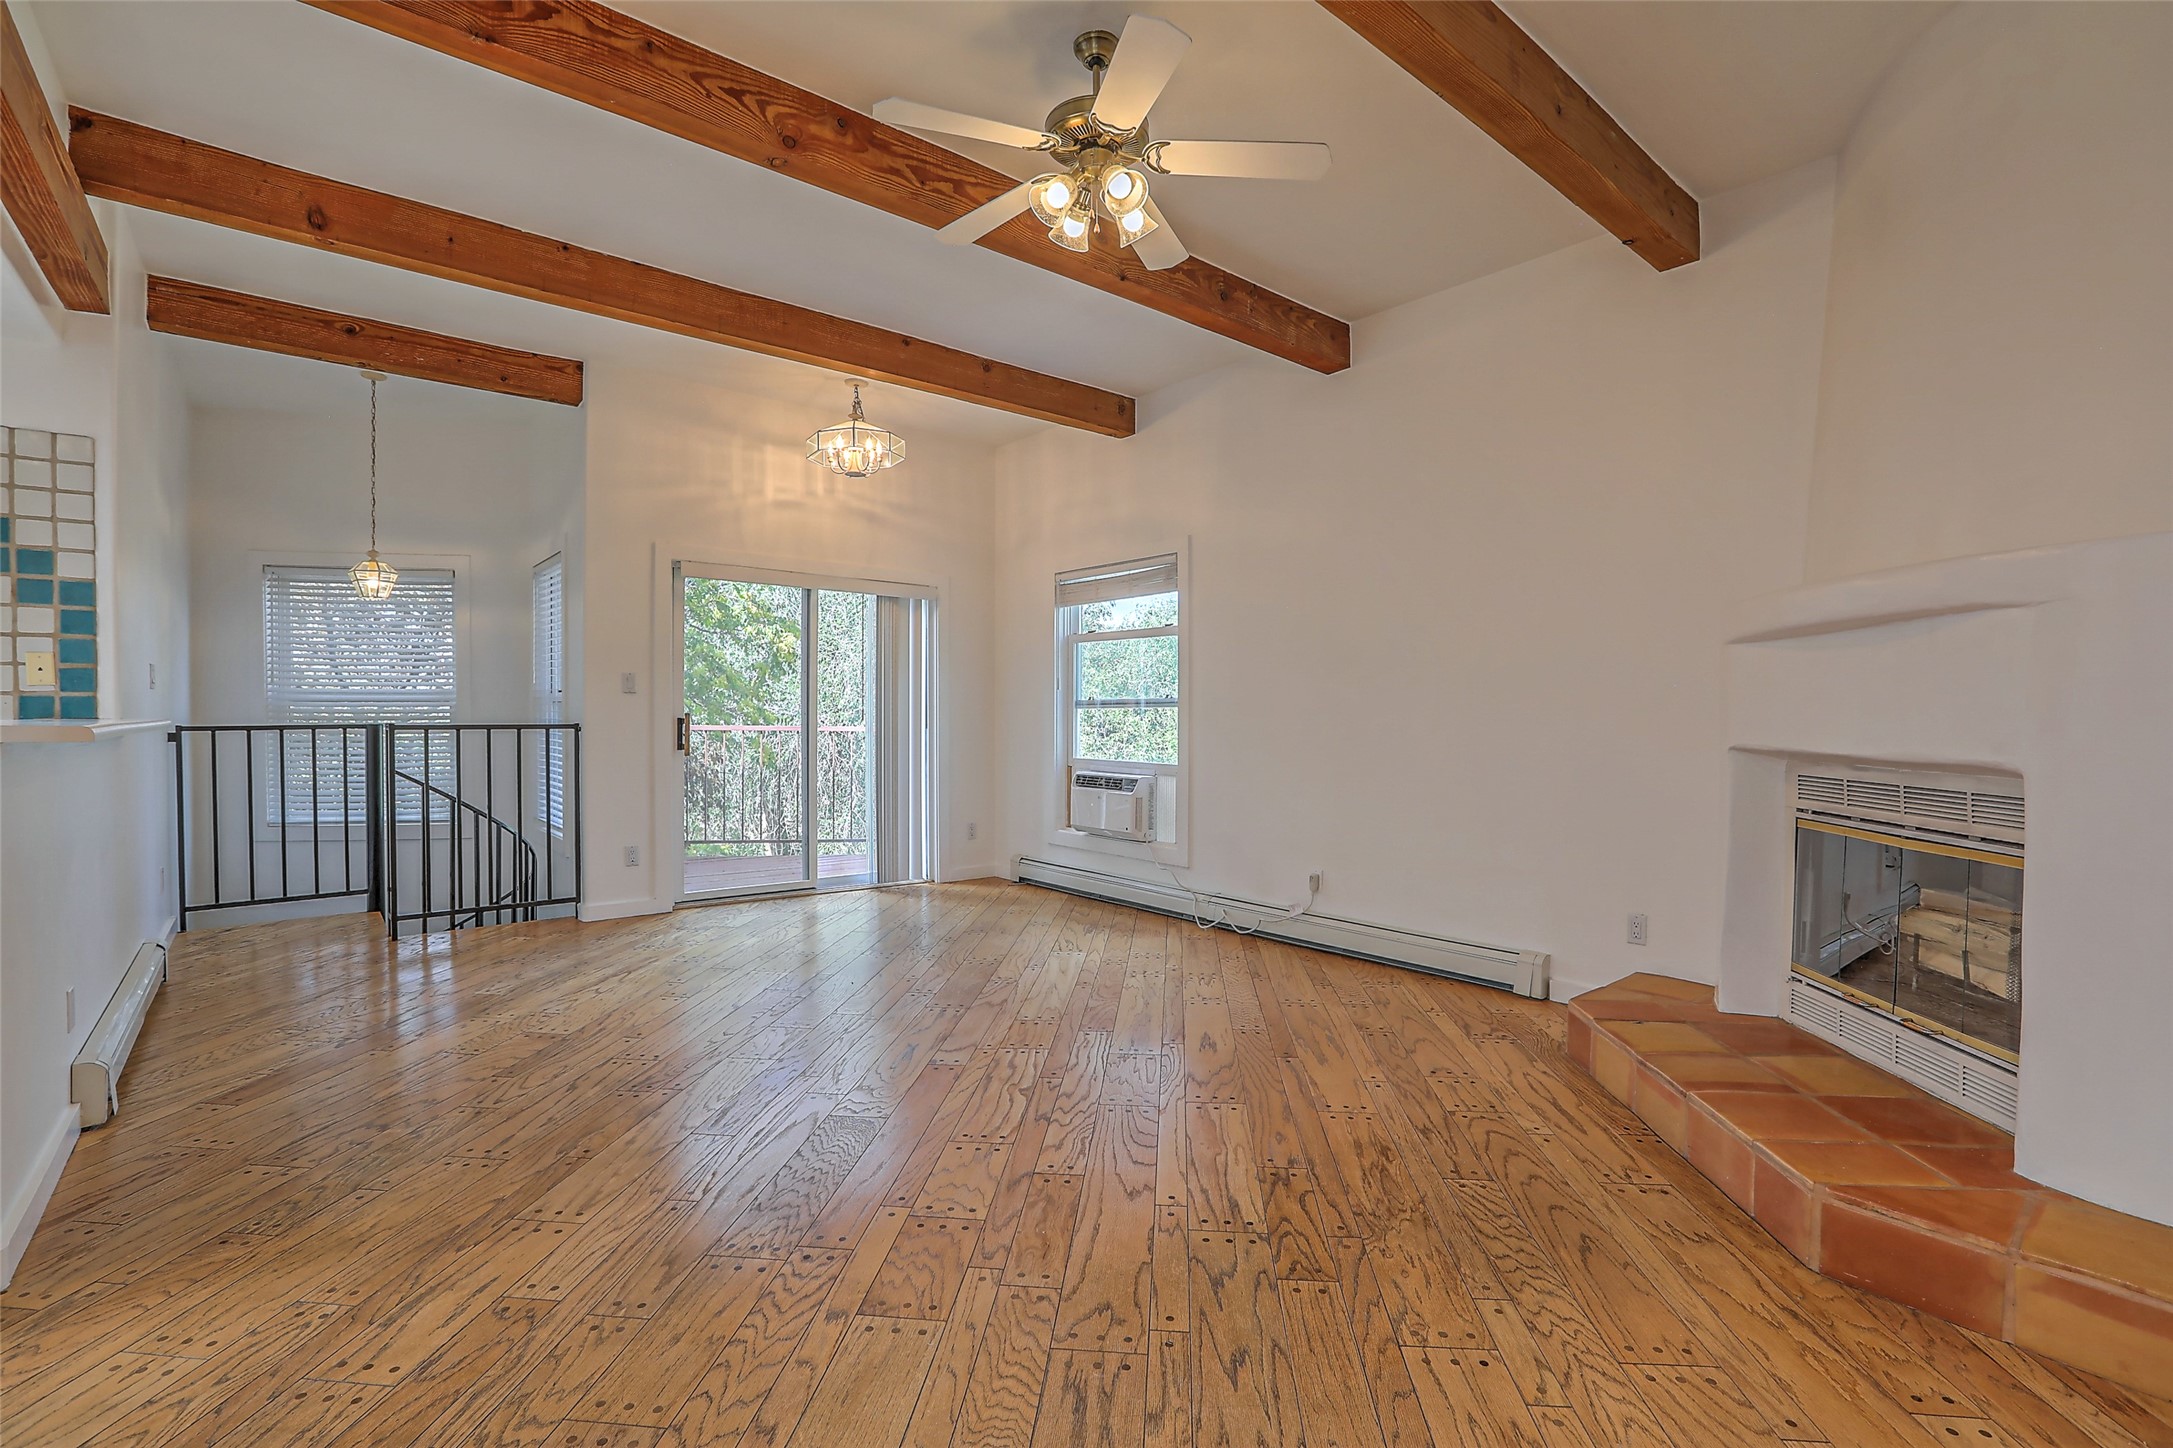 347 E Berger St., Santa Fe, New Mexico 87505, 5 Bedrooms Bedrooms, ,4 BathroomsBathrooms,Residential,For Sale,347 E Berger St.,202341037